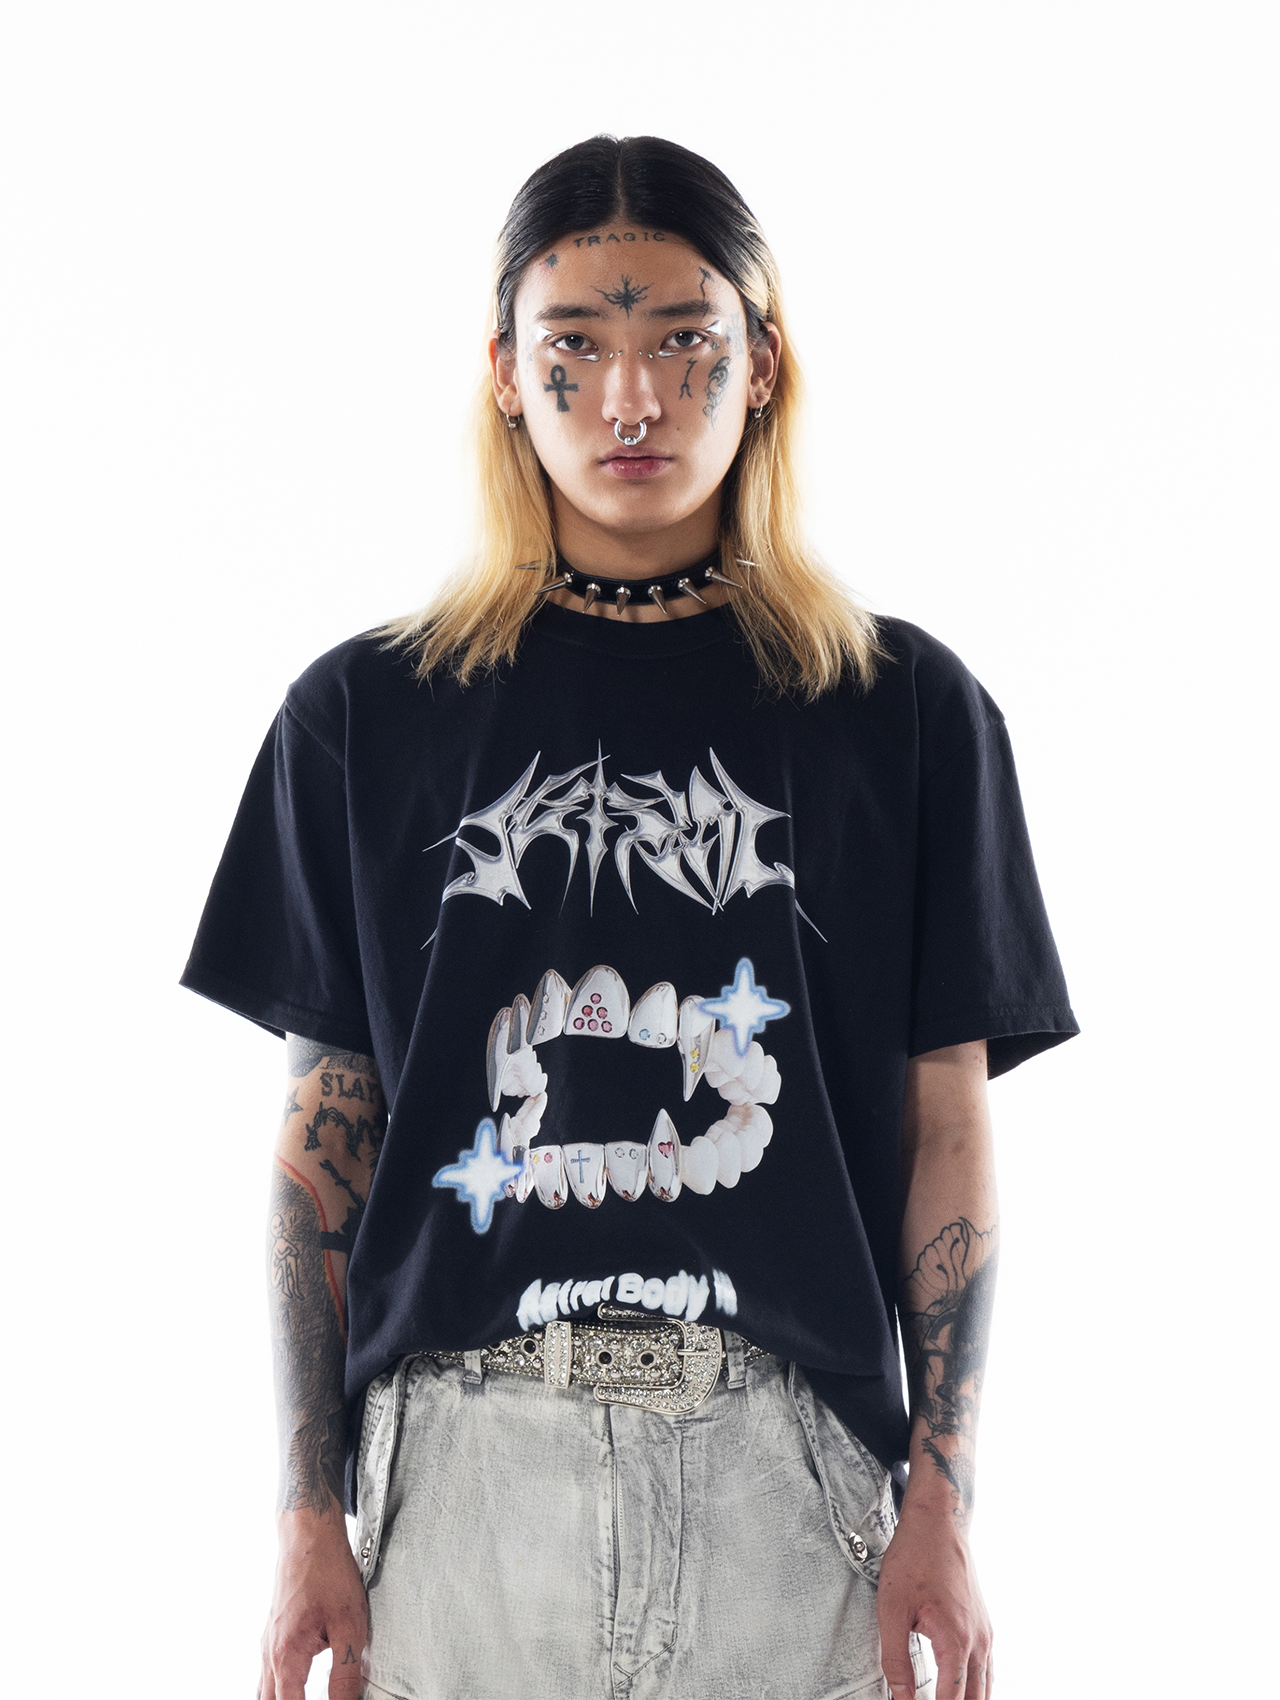 Astral grillz T shirt